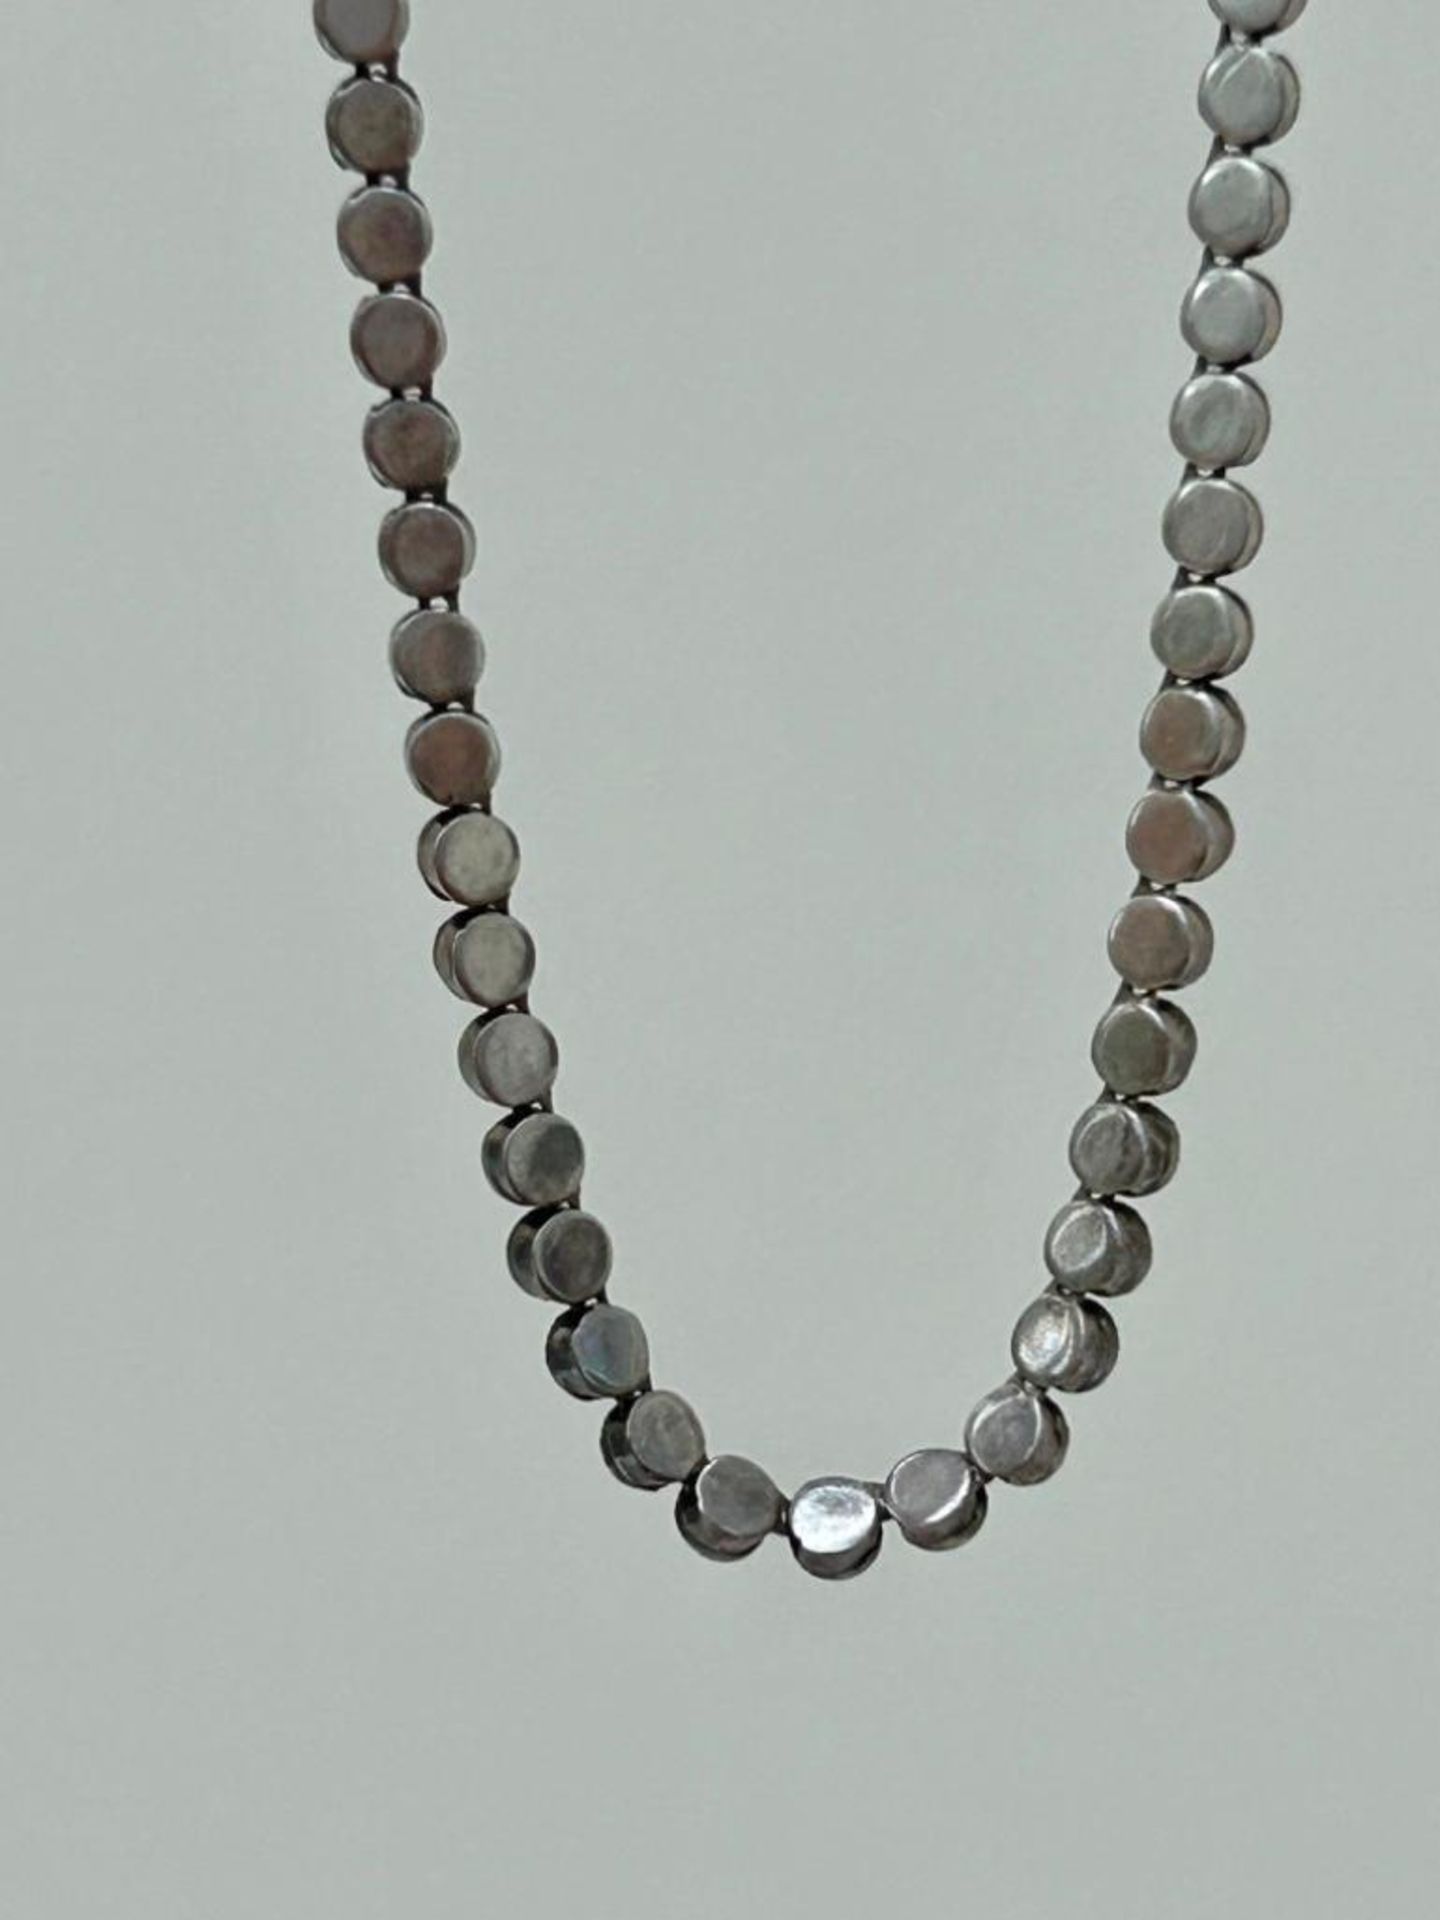 Wonderful Paste Riviere Necklace Silver - Image 6 of 6